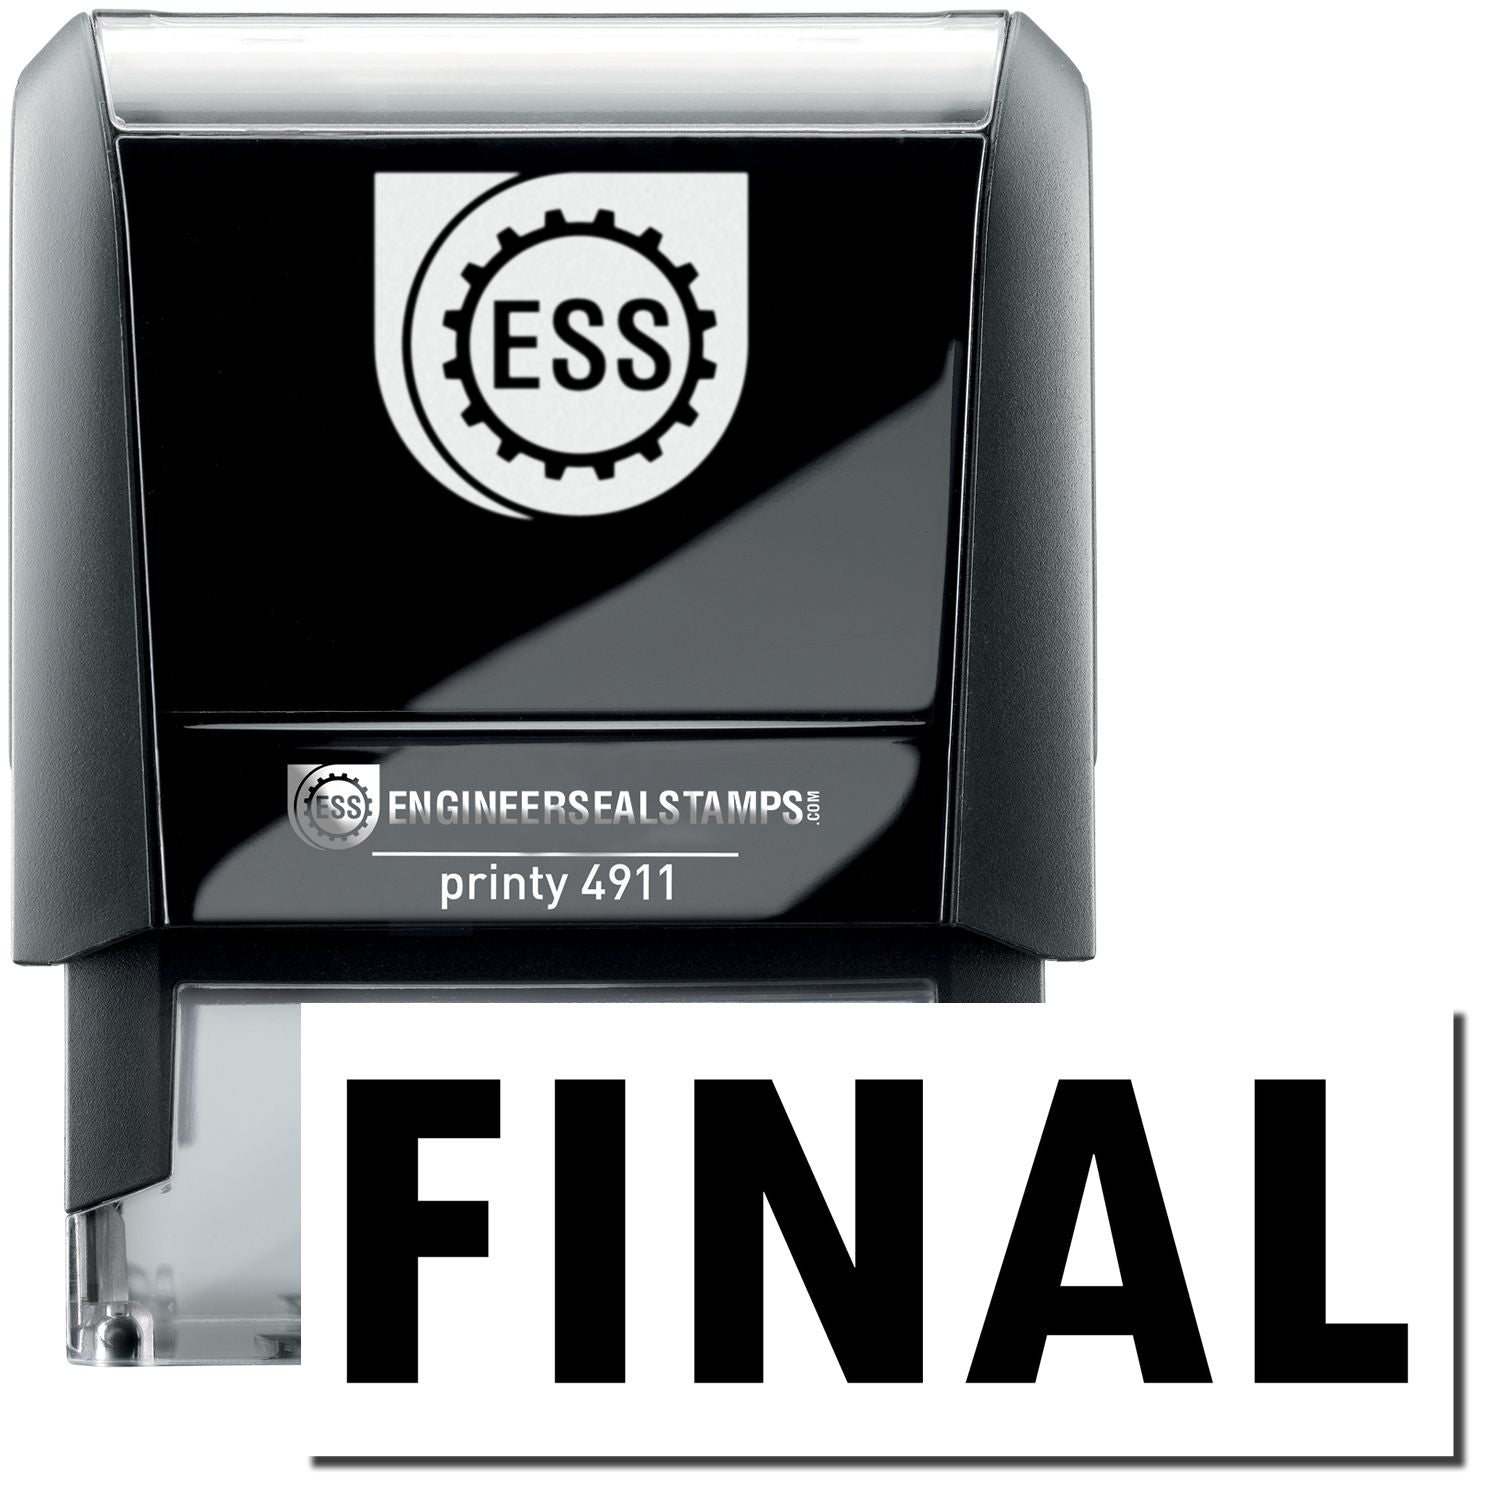 A self-inking stamp with a stamped image showing how the text "FINAL" is displayed after stamping.